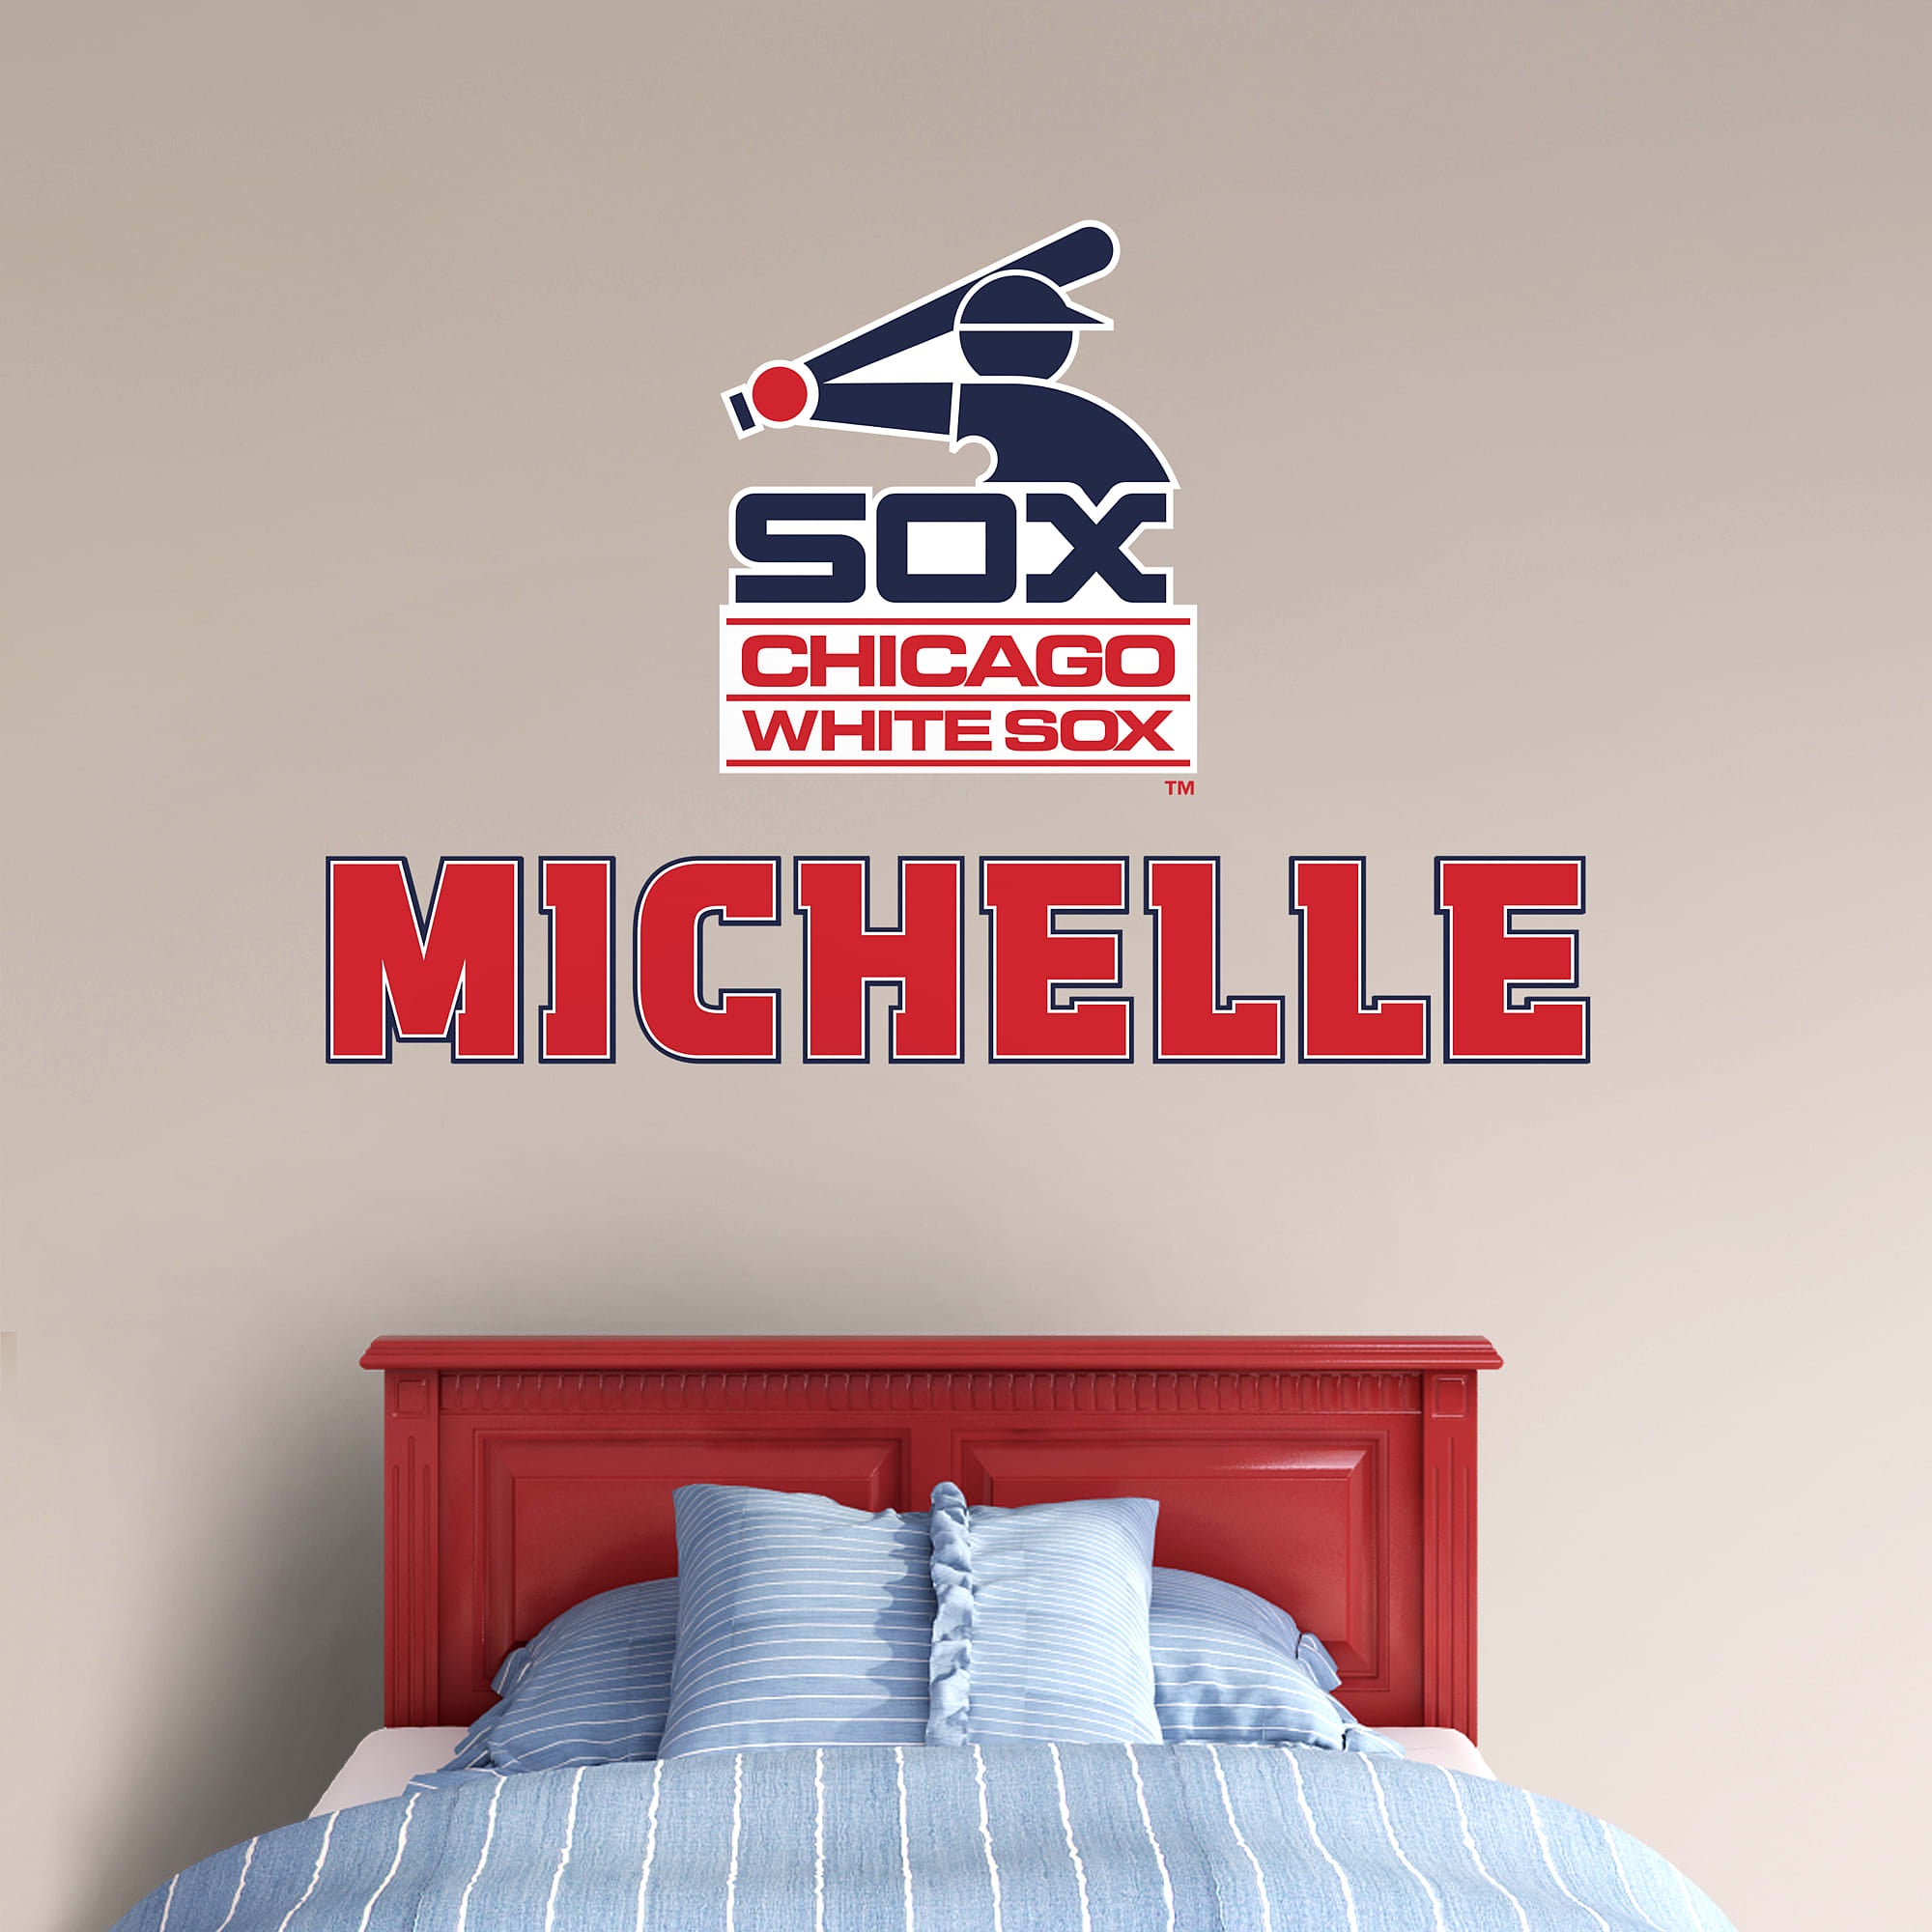 Chicago White Sox: Classic Stacked Personalized Name - Officially Licensed MLB Transfer Decal in Red (52"W x 39.5"H) by Fathead